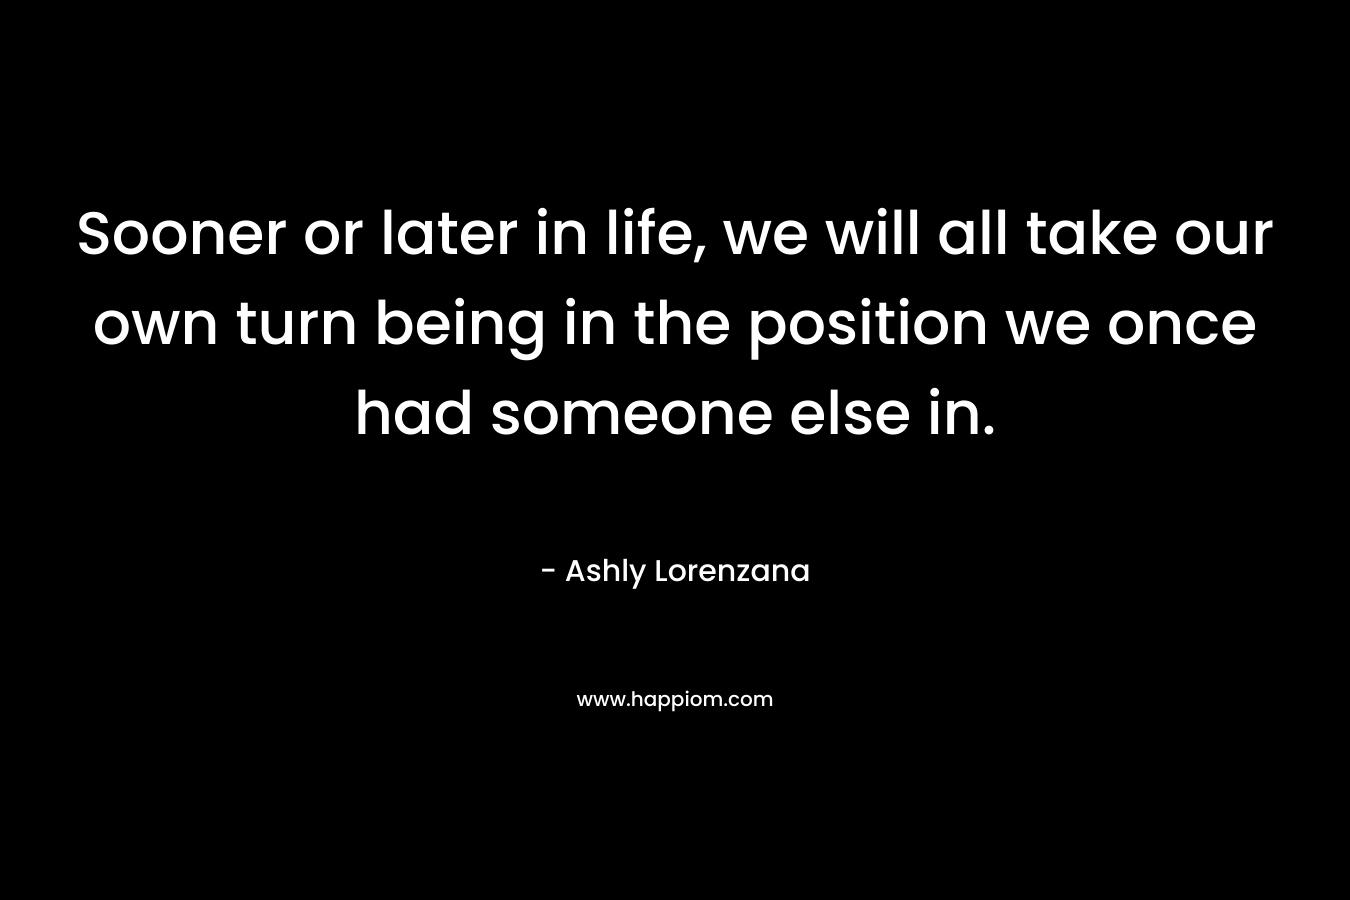 Sooner or later in life, we will all take our own turn being in the position we once had someone else in. – Ashly Lorenzana